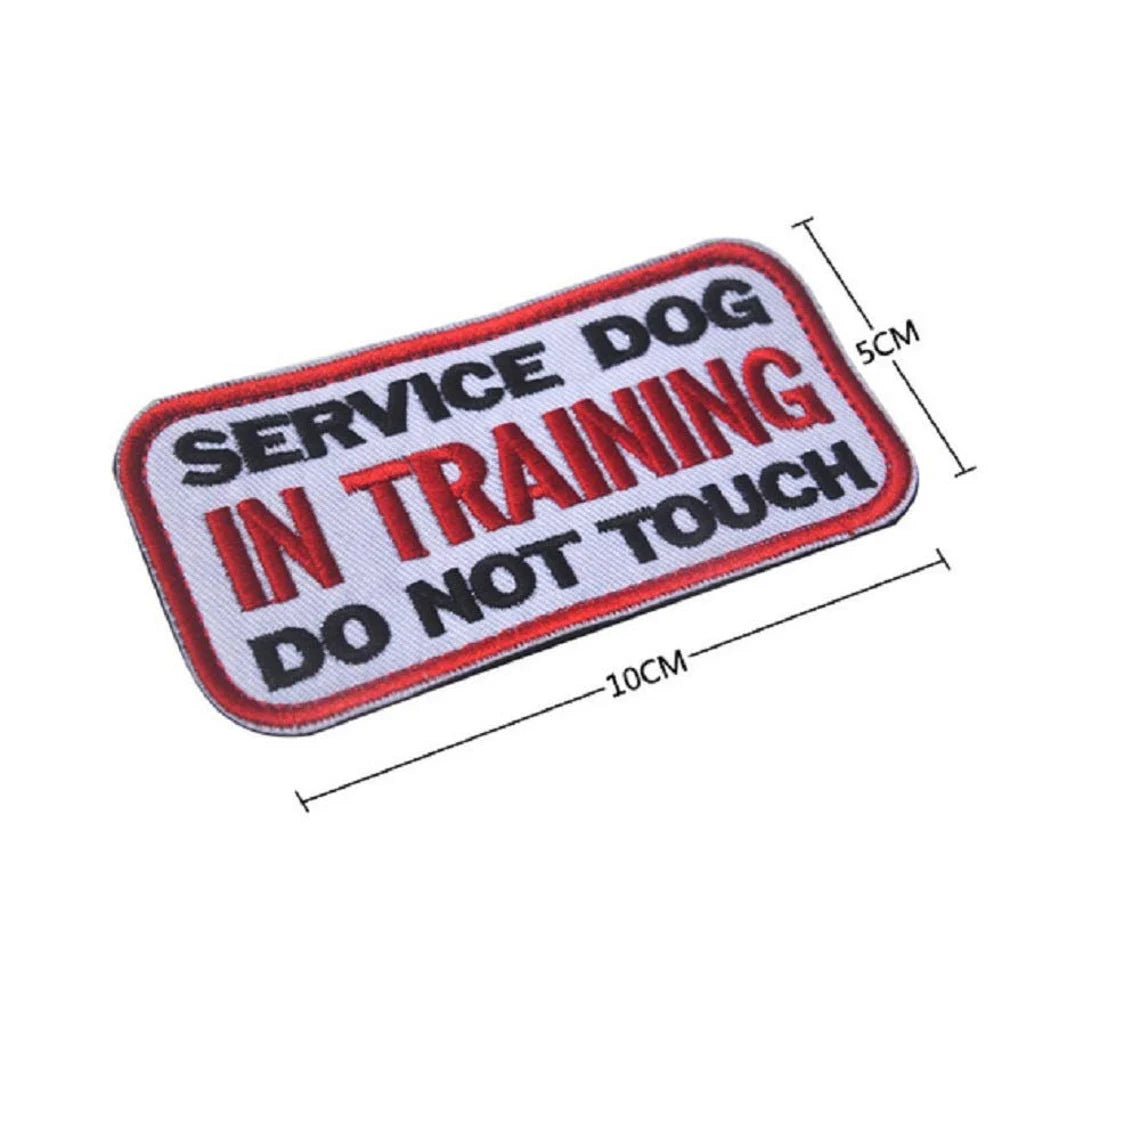 Service Dog in Training Do Not Touch Dog Patch (4 Inch) Velcro Badge